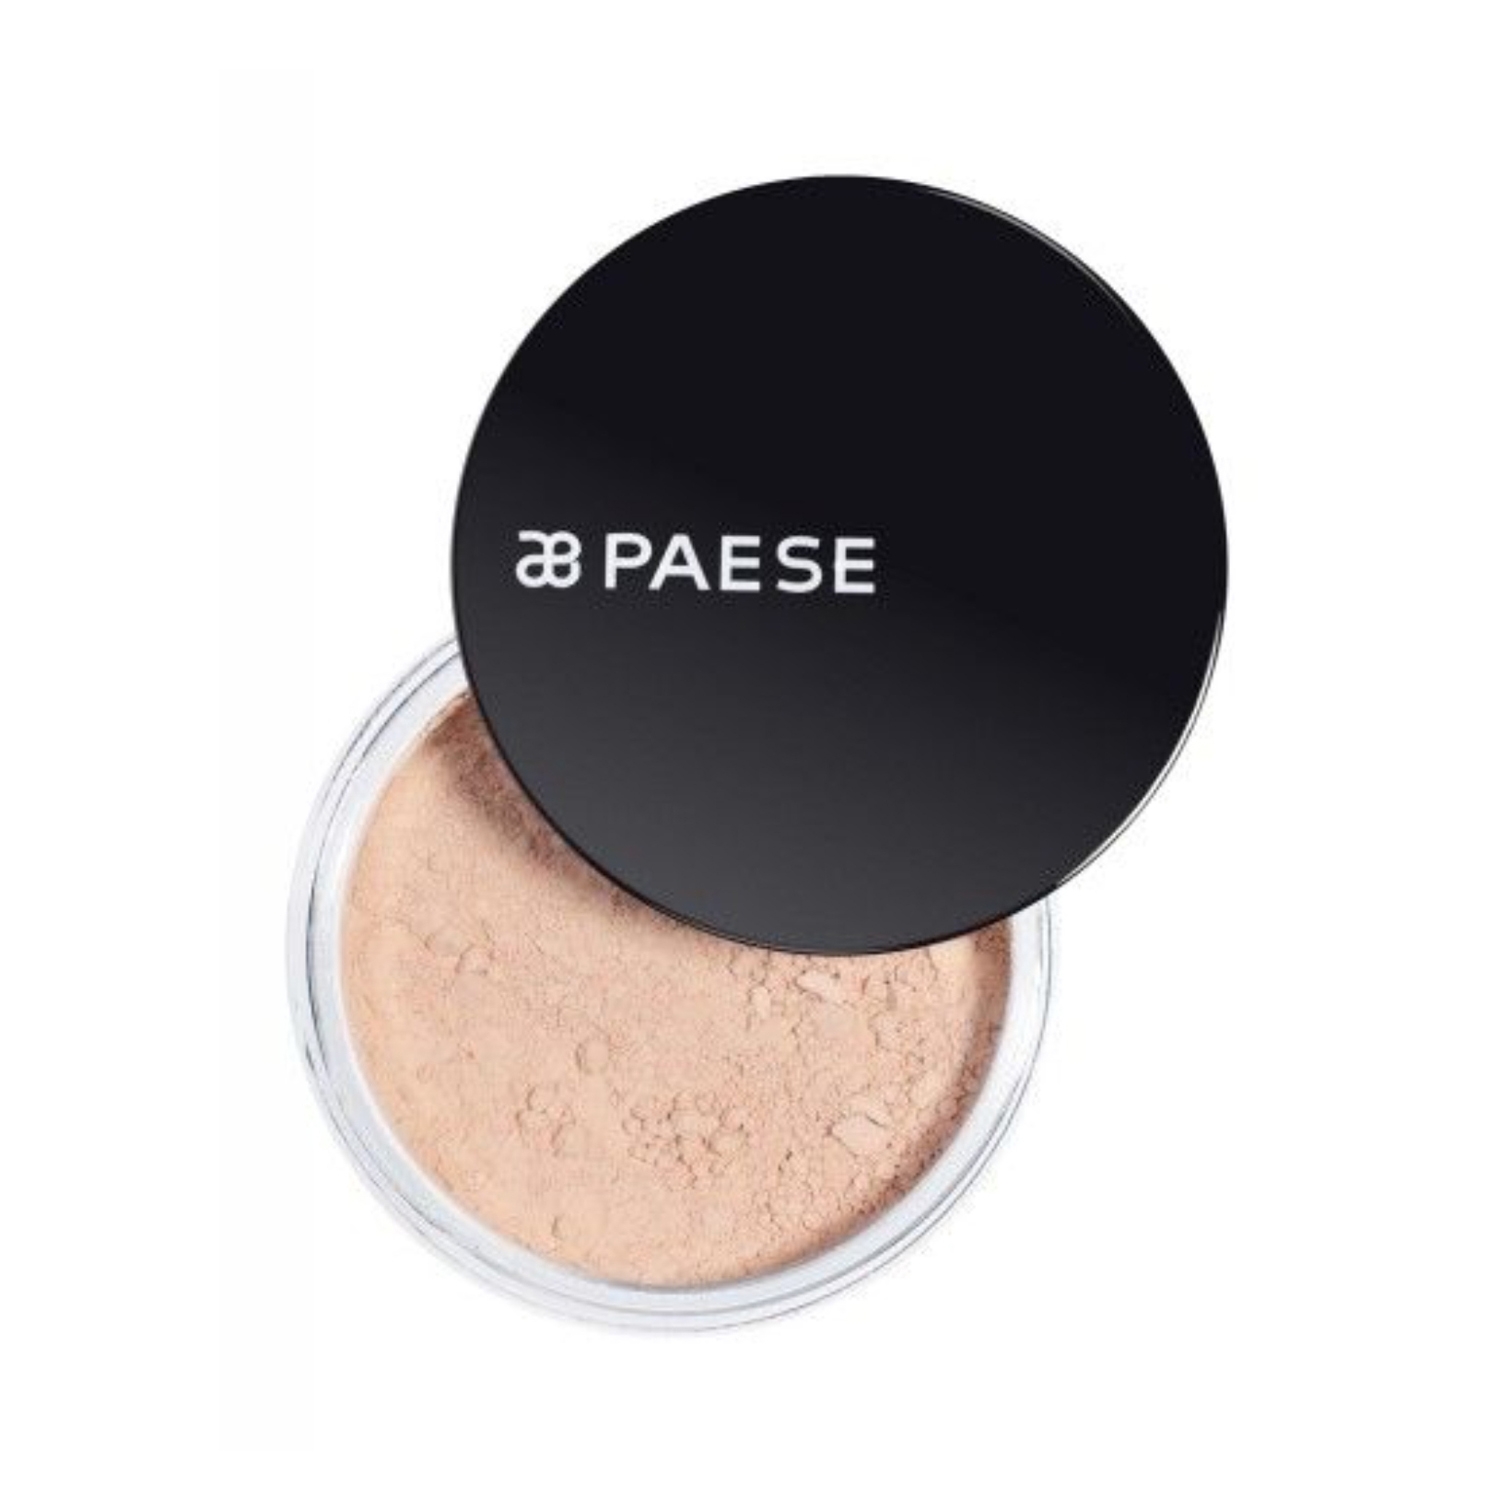 Paese Cosmetics | Paese Cosmetics High Definition Loose Powder - 03 Shade (15g)